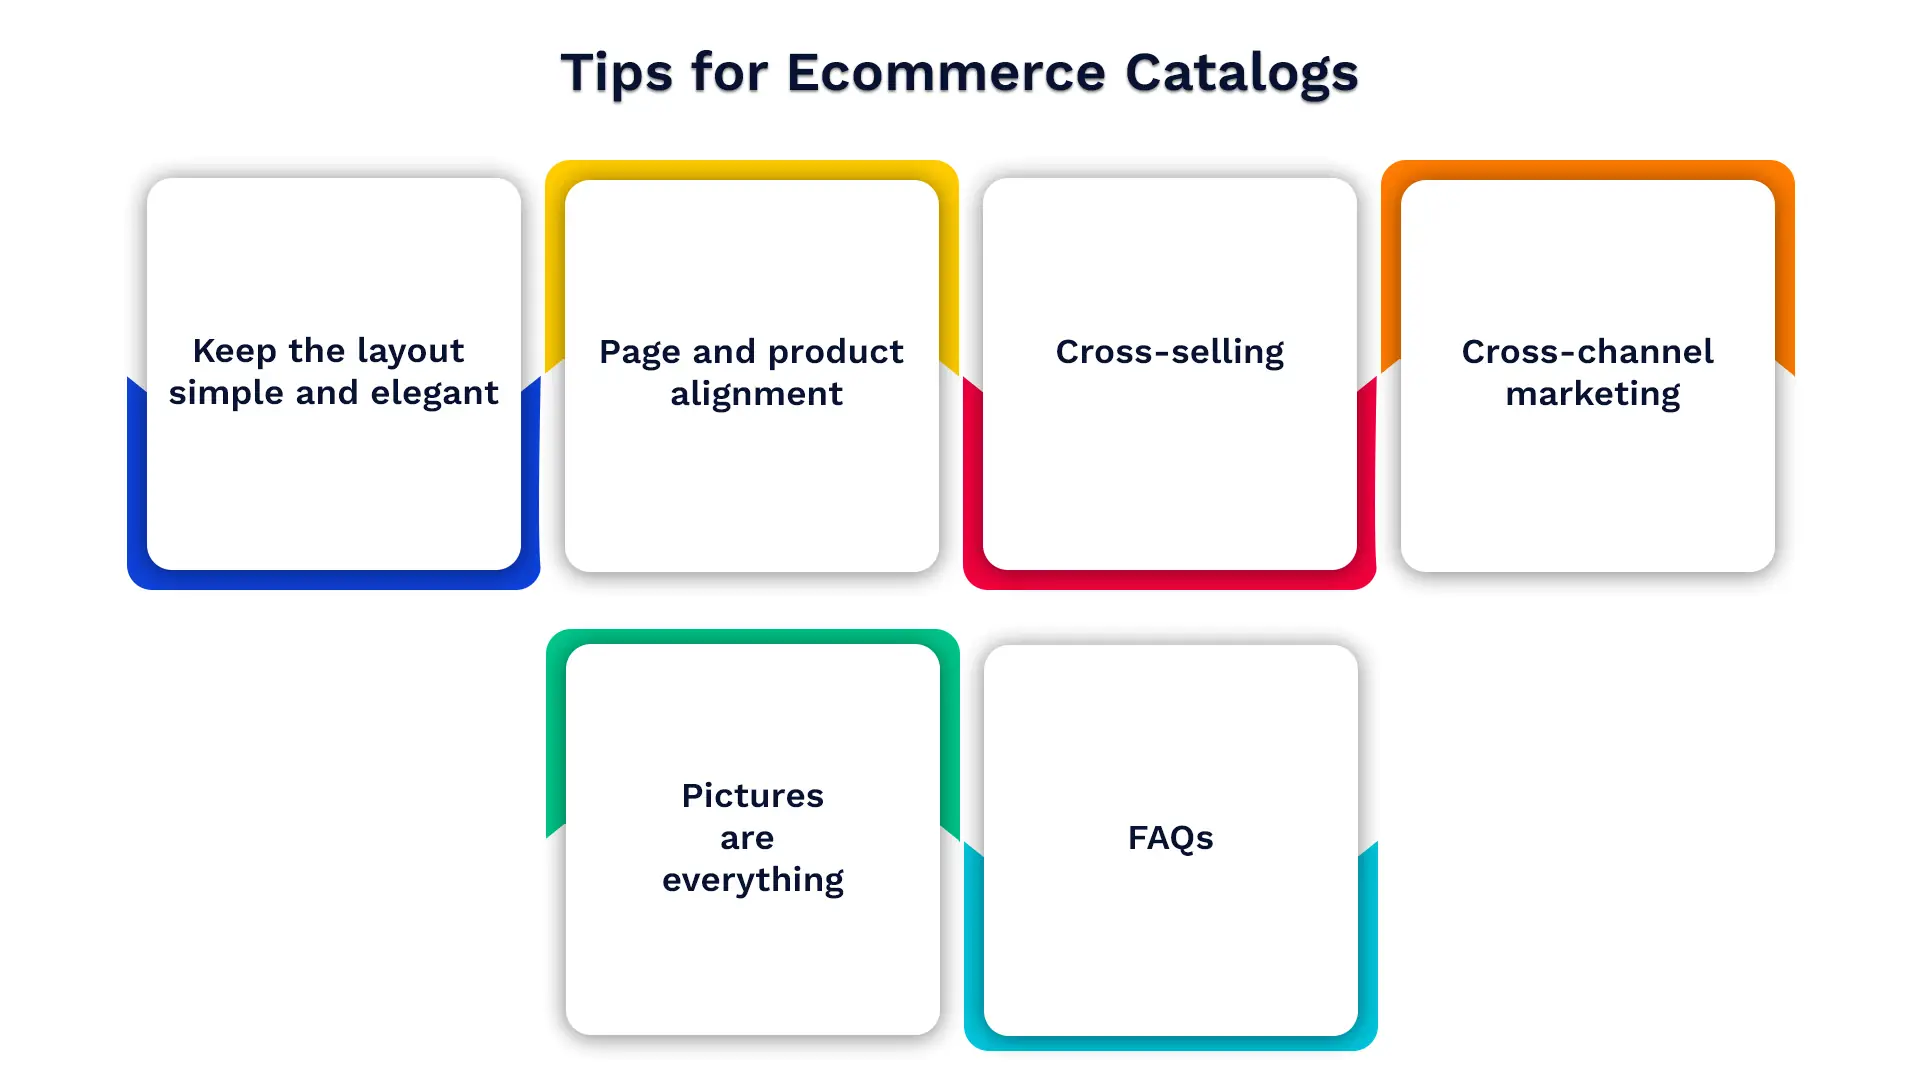 Tips for eCommerce Catalogs